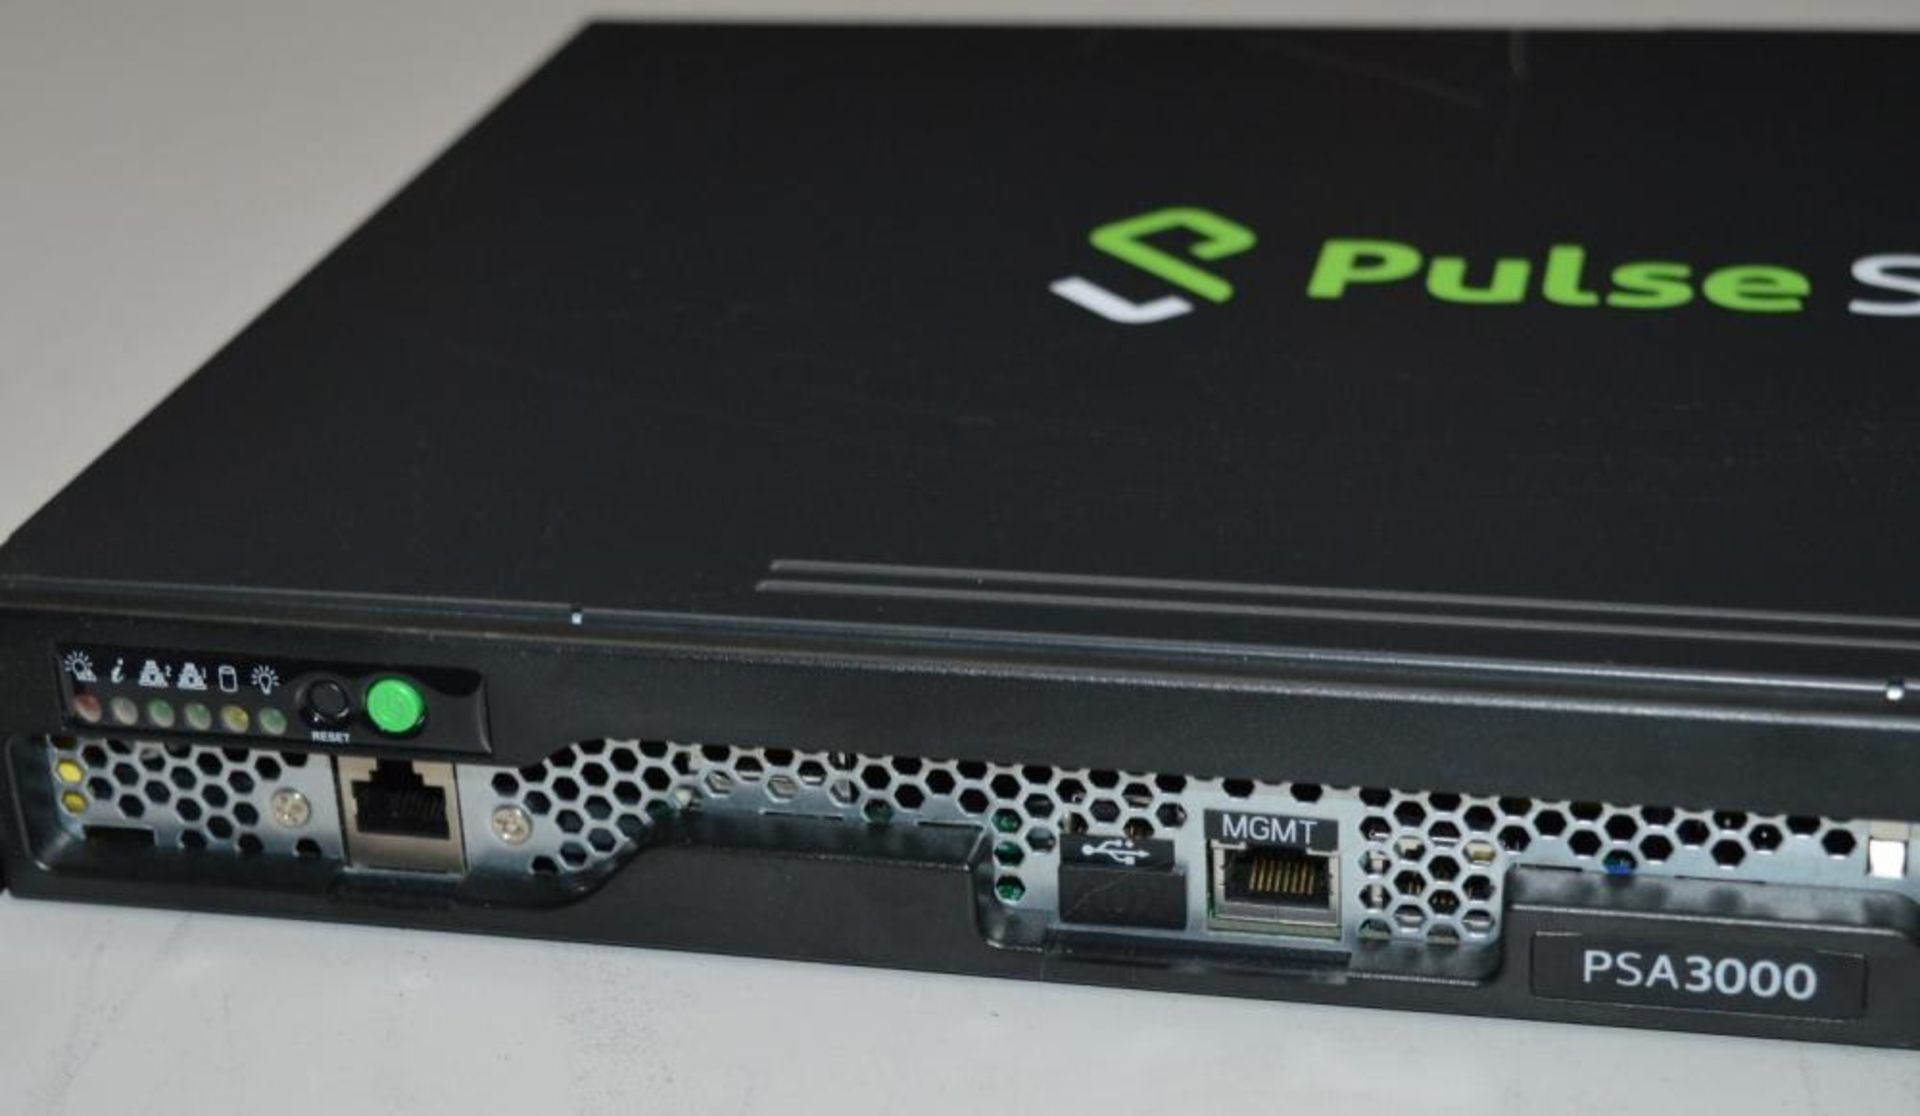 1 x Pulse Secure PSA3000 Security Appliance - CL285 - Ref JP327 F2 - Location: Altrincham WA14 - RRP - Image 5 of 5